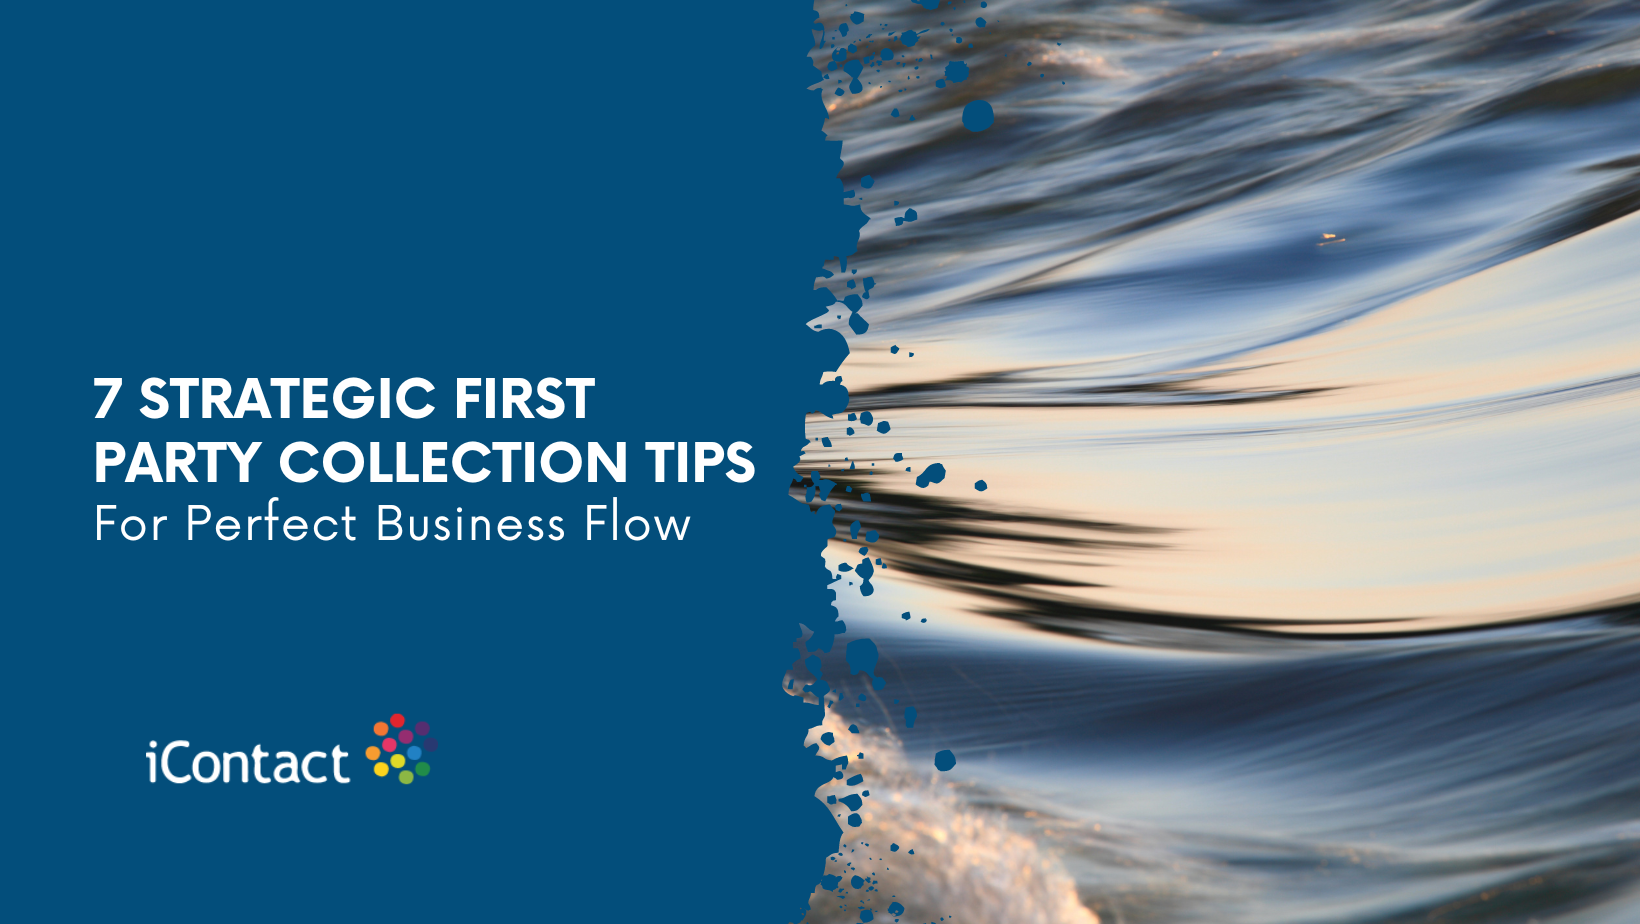 7 strategic tips for first party collection with iContact BPO